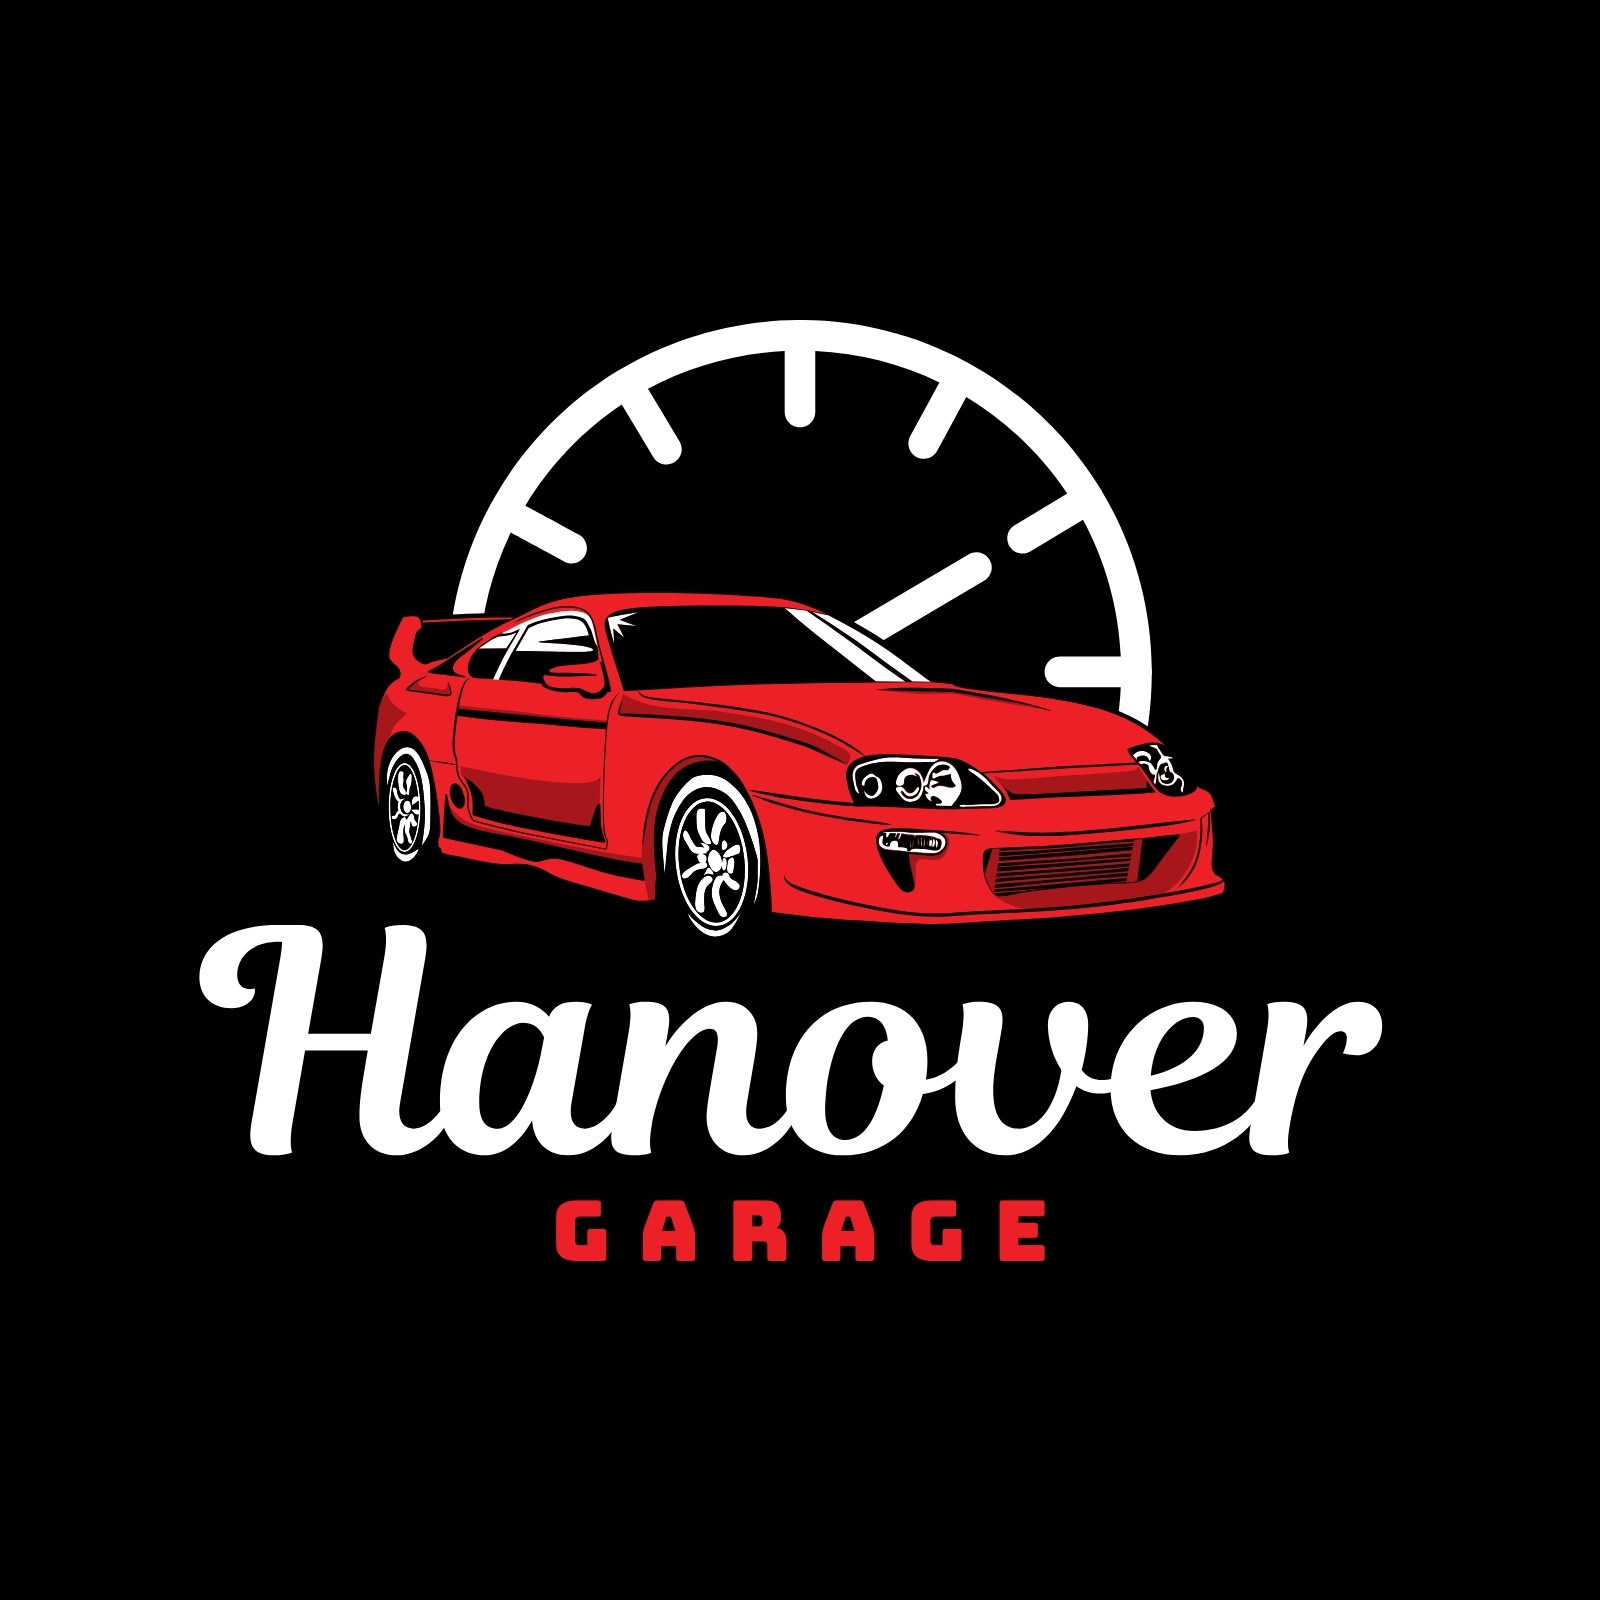 Black and Red Classic Car Garage Logo